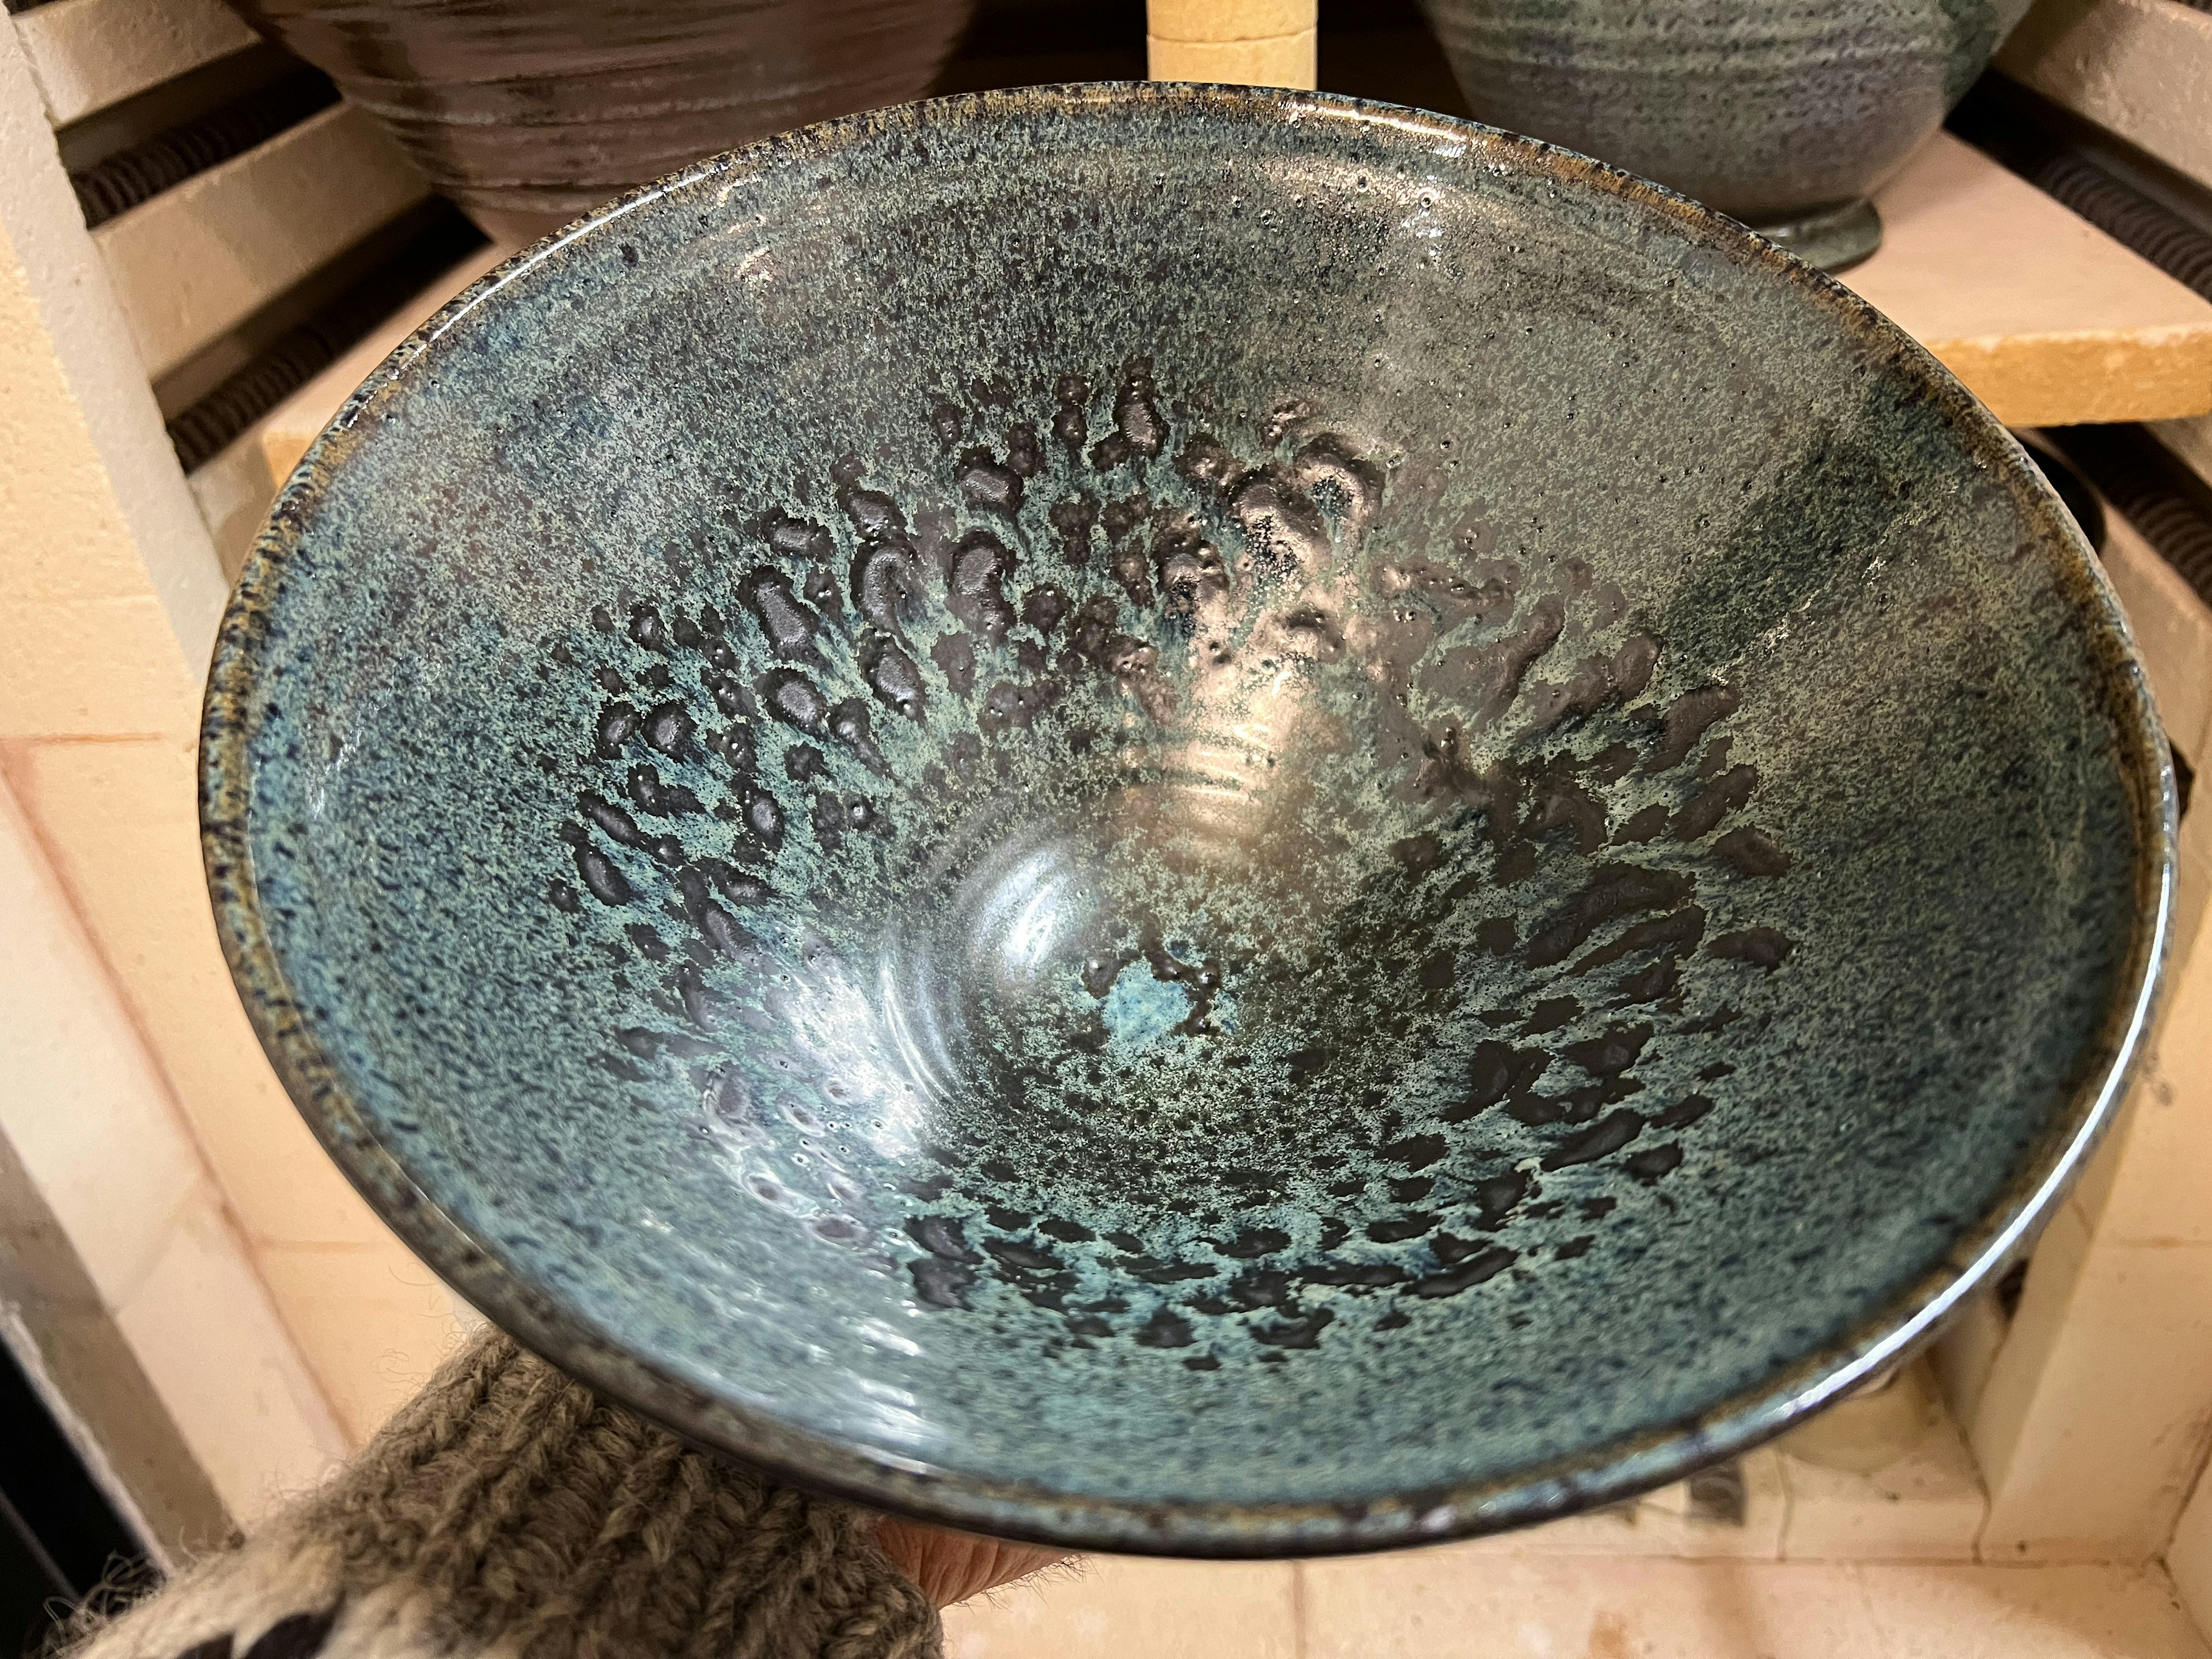 Stonware. The glaze magic happens during firing (1260-80 degrees in Celcius).